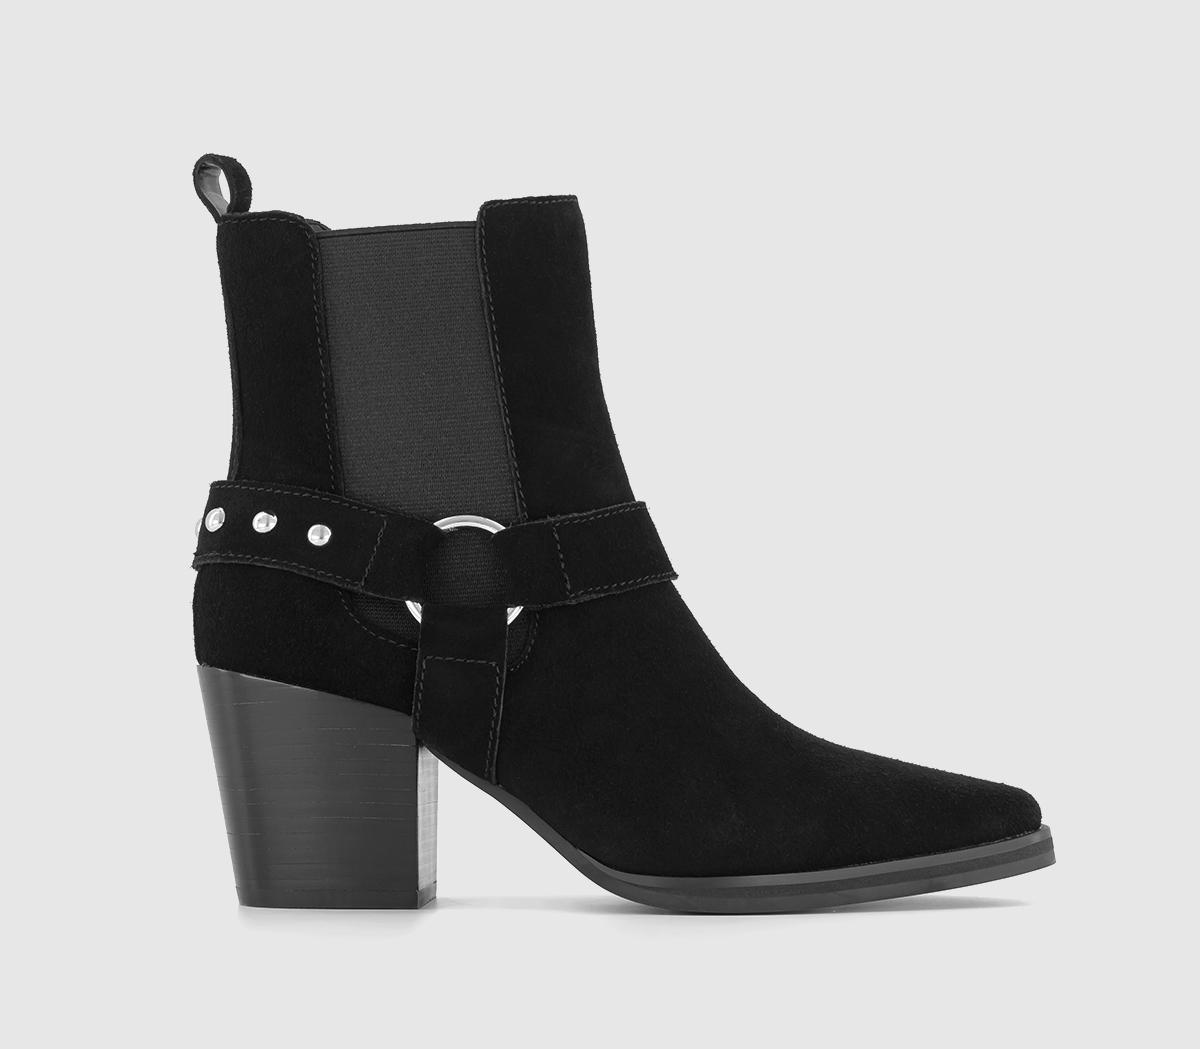 Albion - Harness Western Boots Black Suede